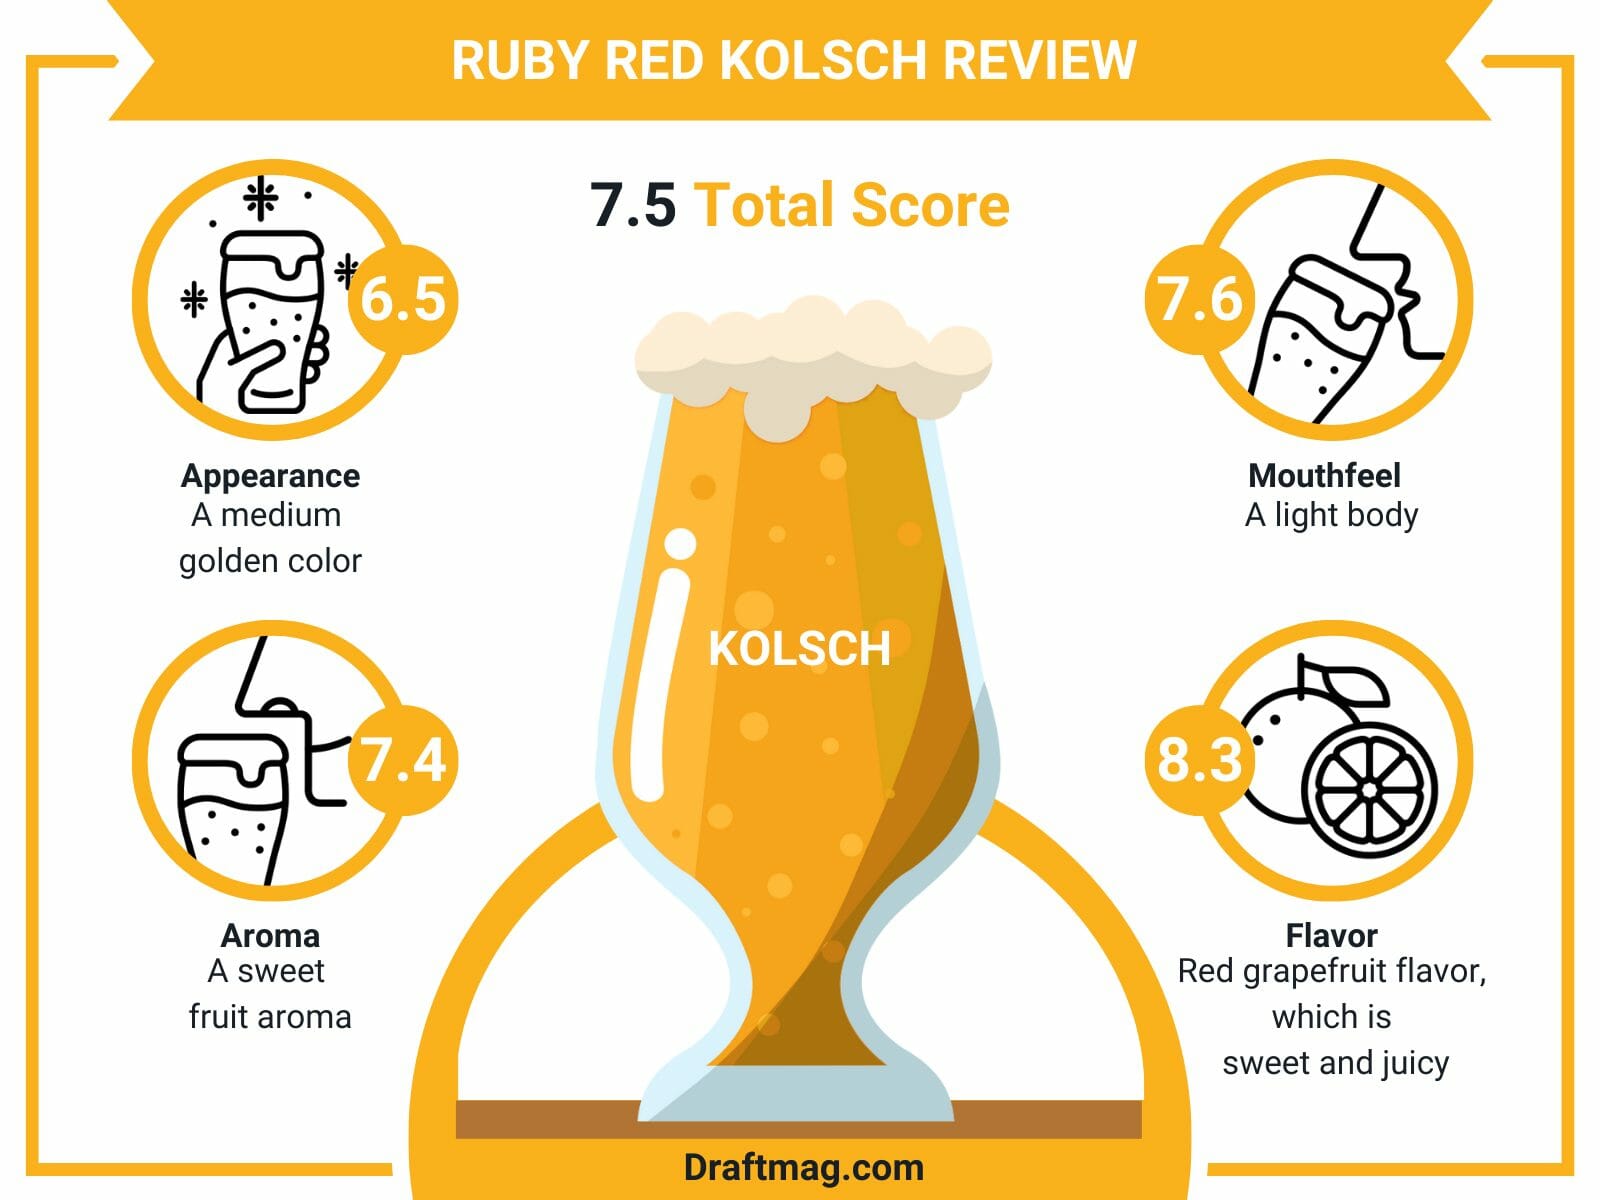 Ruby red kolsch review infographic